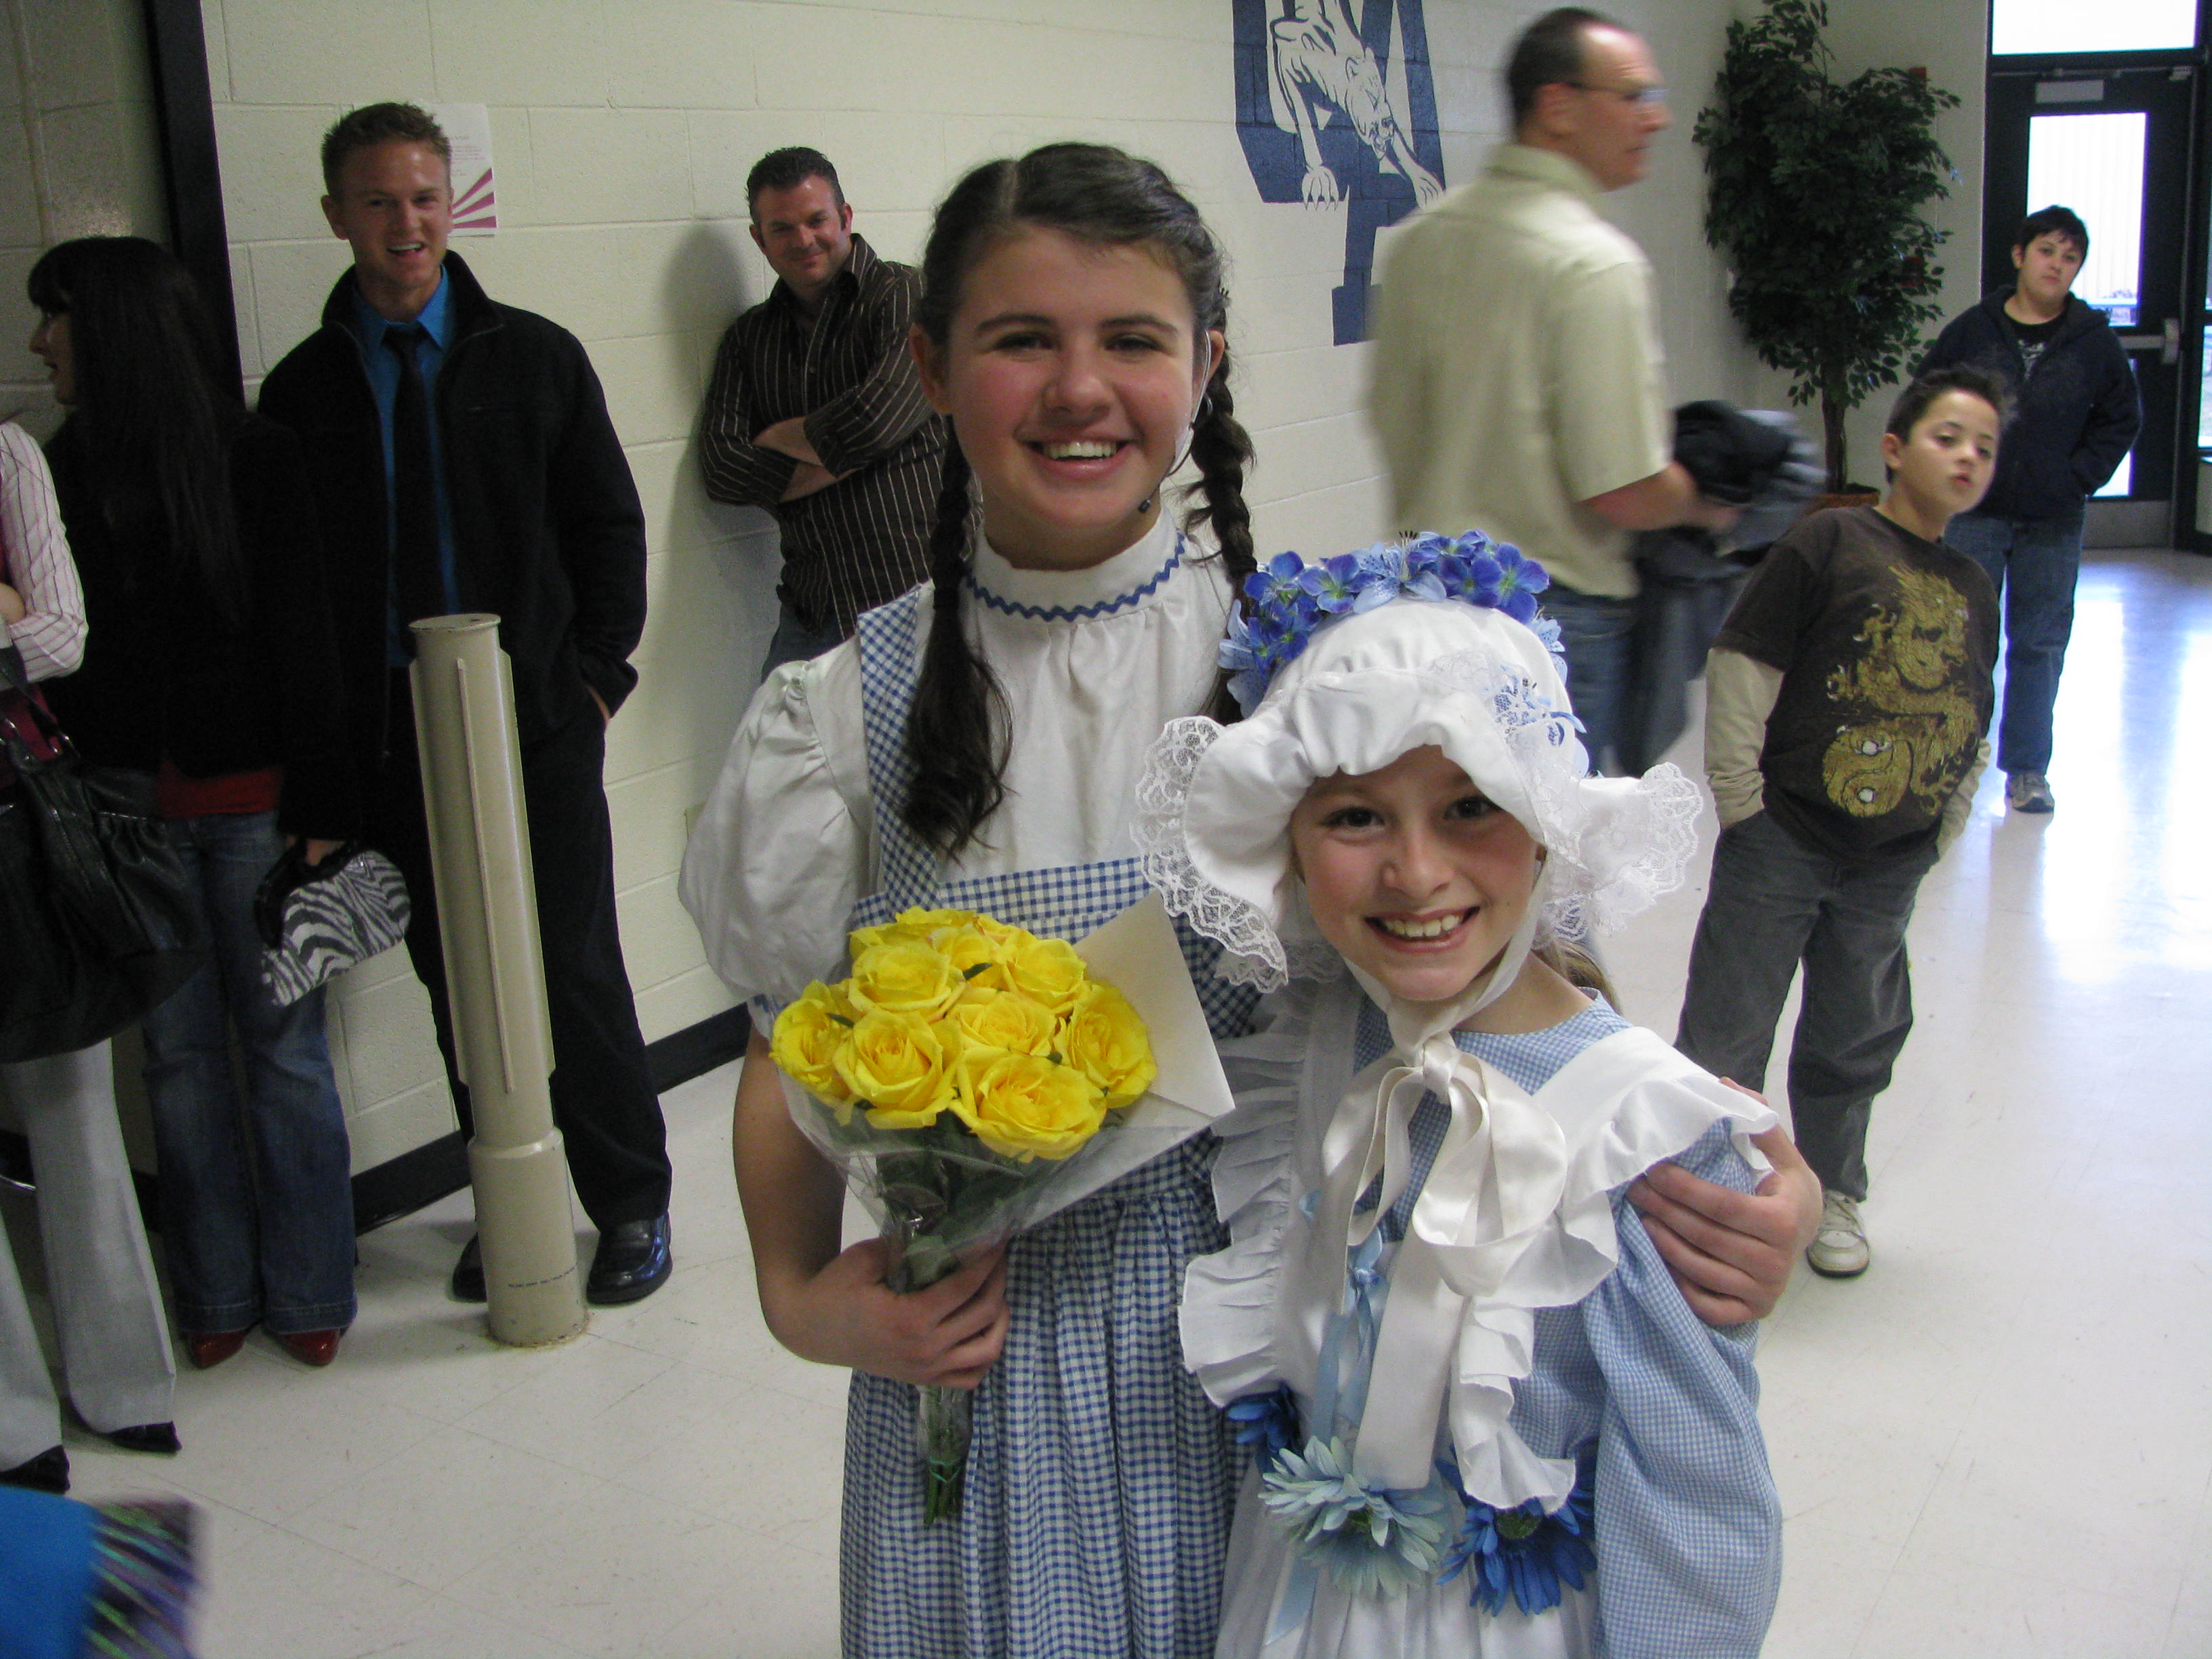 Kayli as a Munchkin in the Union County Performance Ensemble's Production of The Wizard of Oz